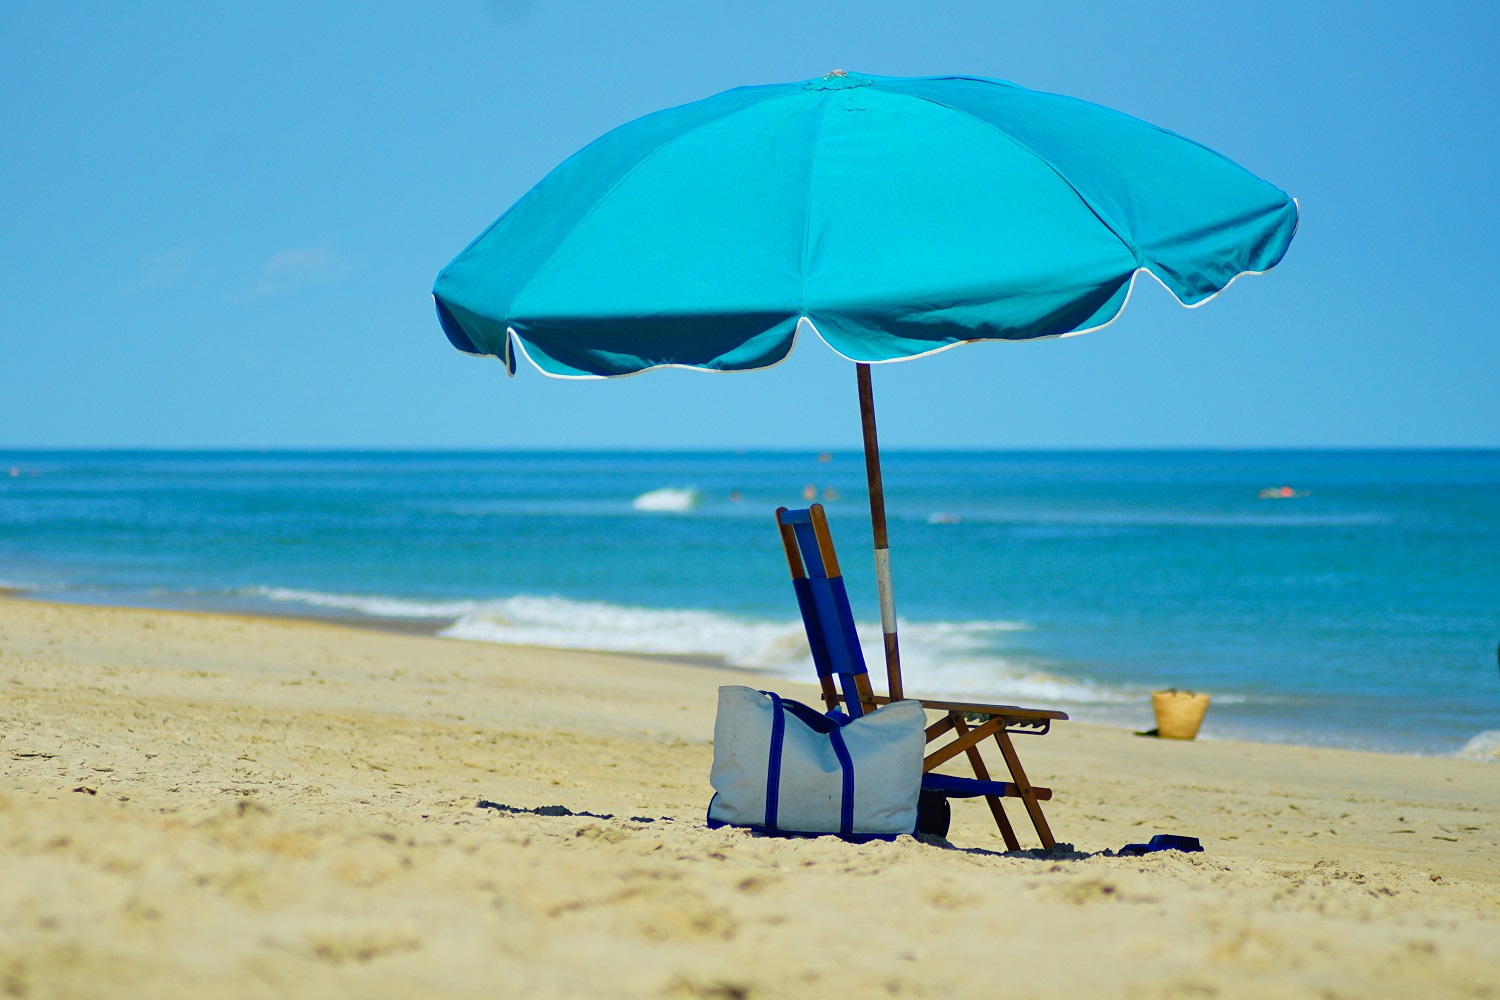 Umbrella at the beach, one of the best ways to stay cool in Lowcountry summer